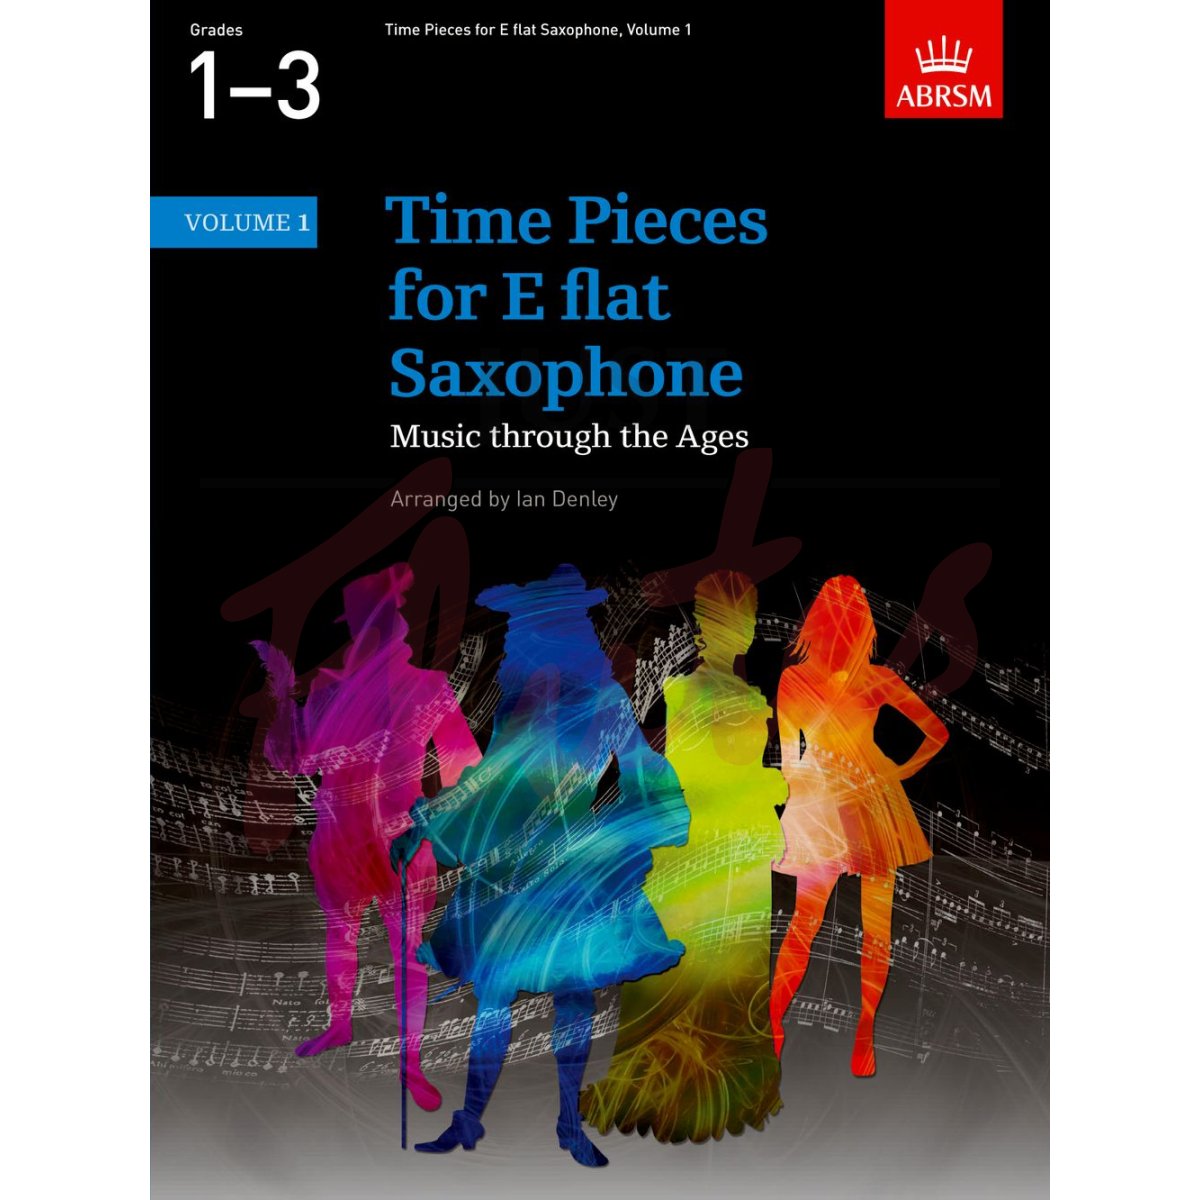 Time Pieces for E flat Saxophone